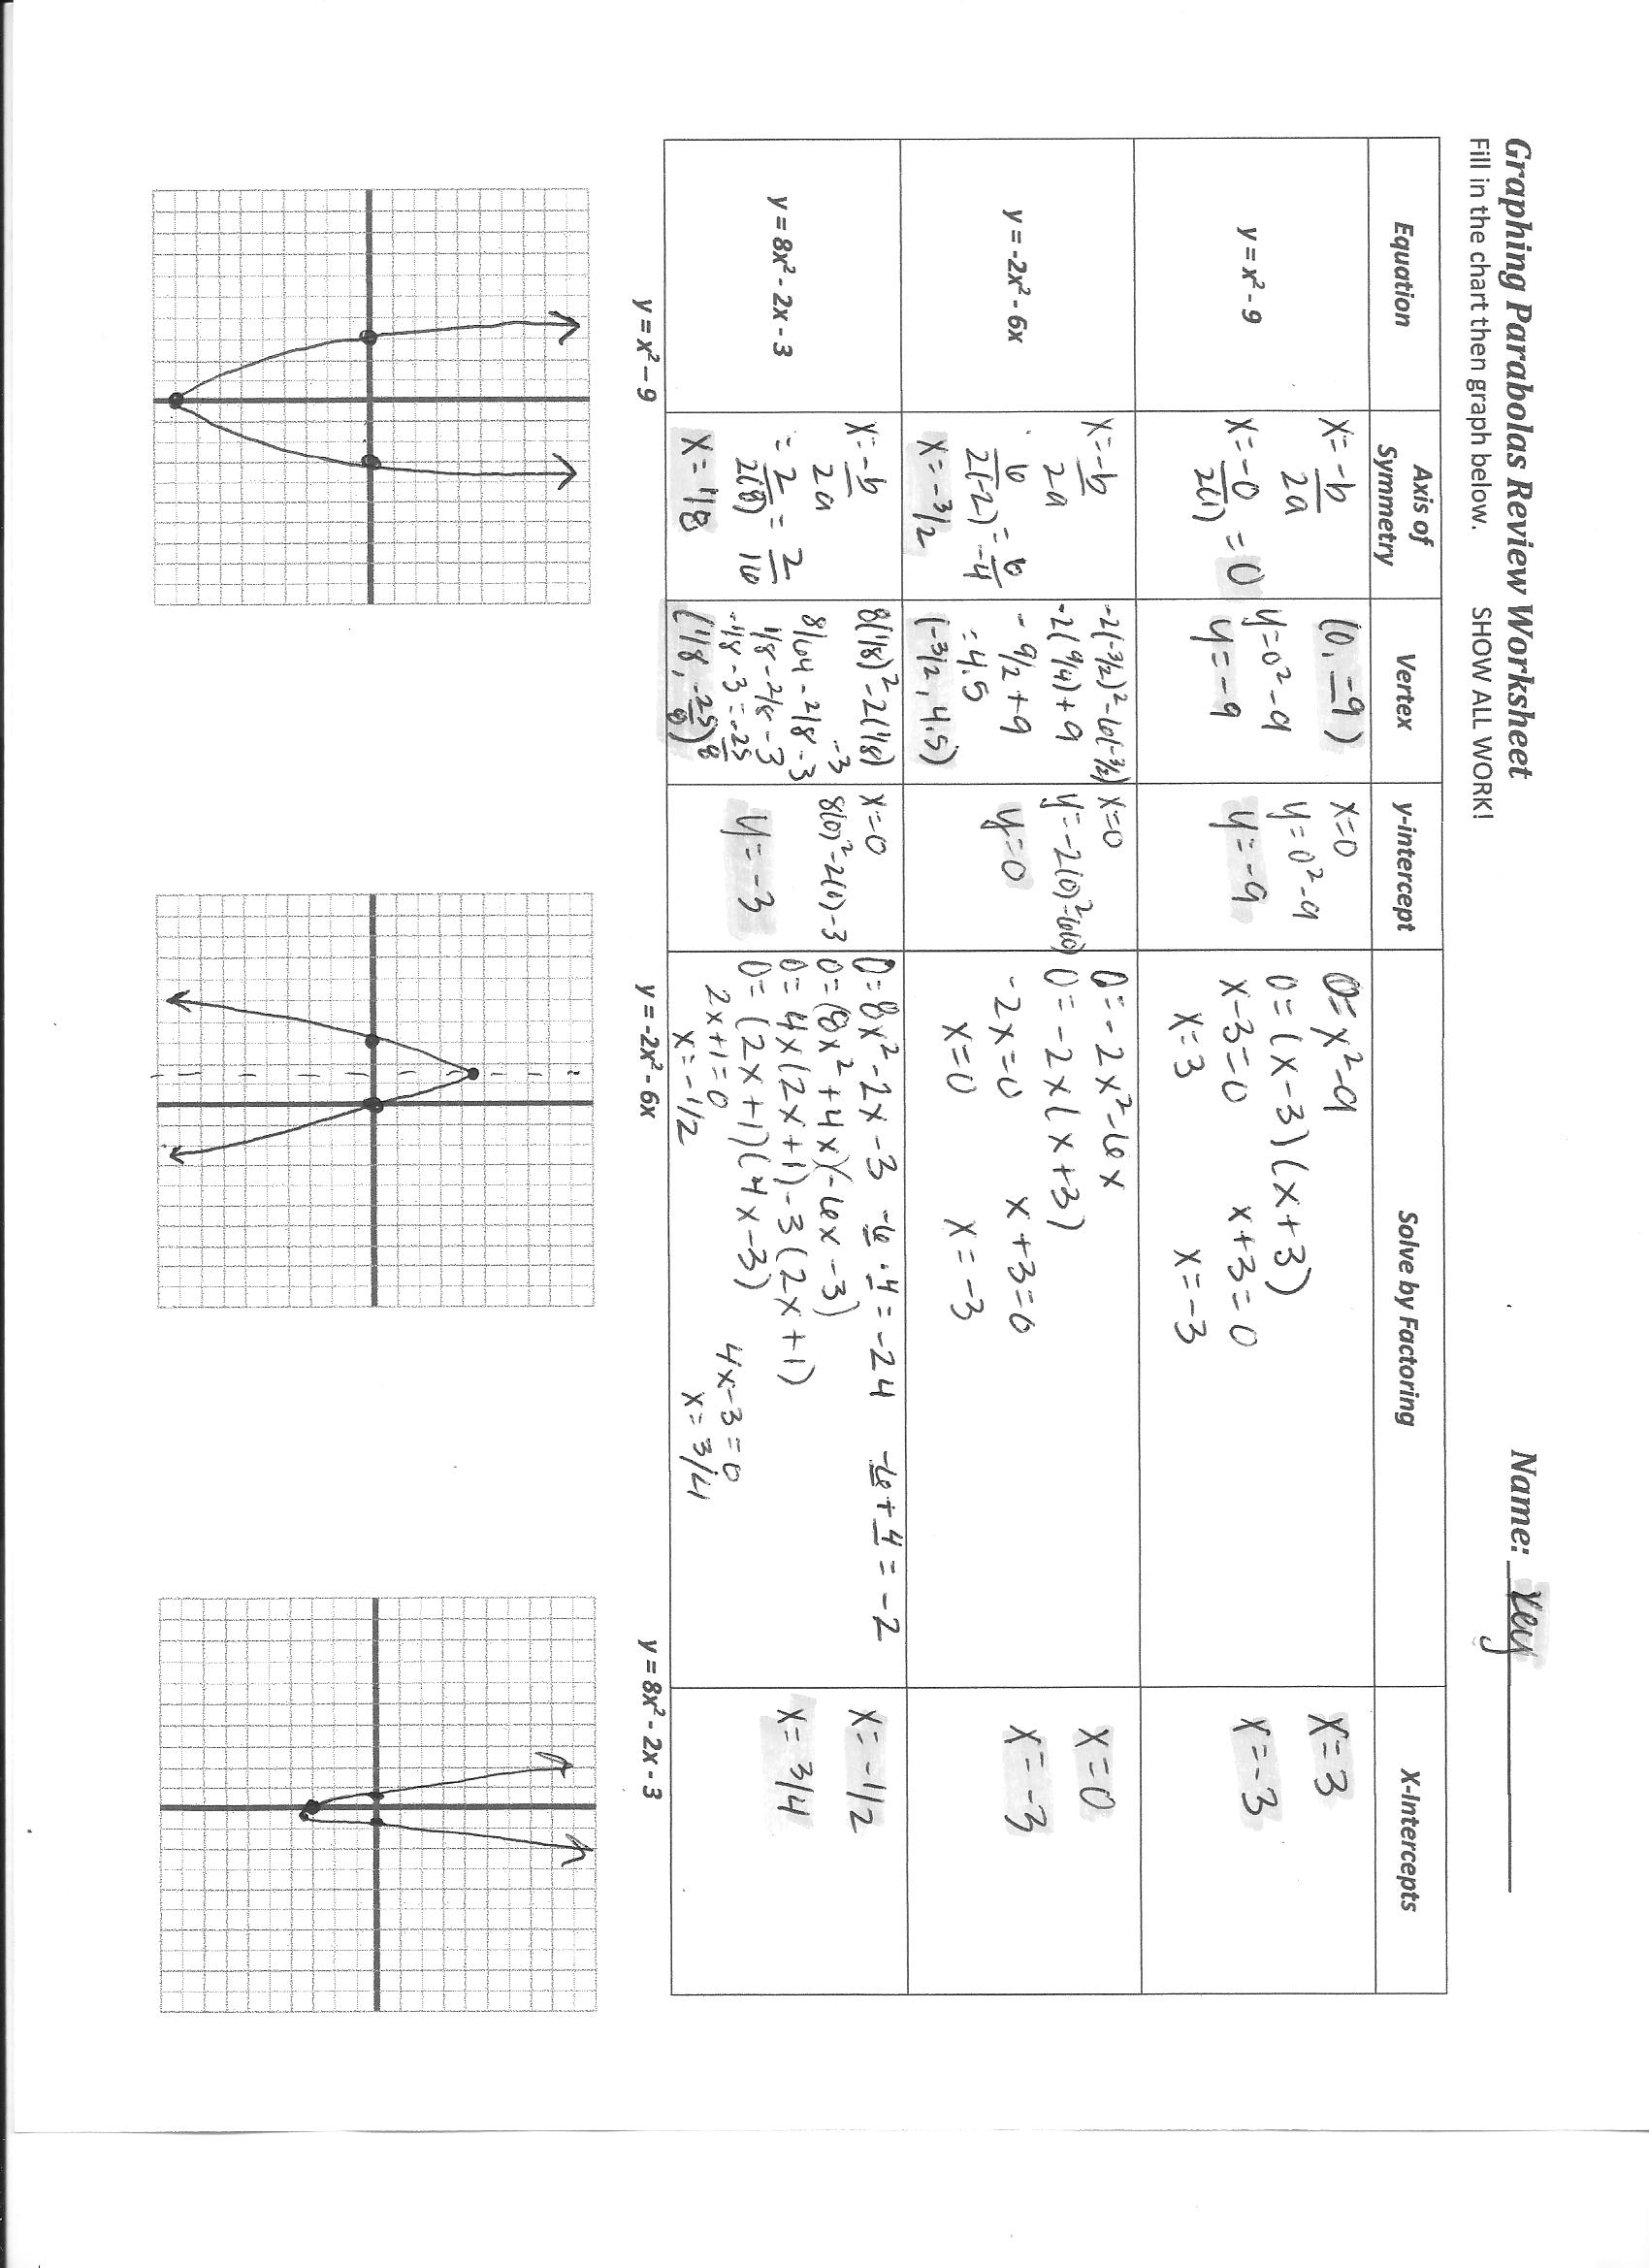 Sketching Quadratic Graphs Questions And Answers Regarding Graphing Quadratic Functions Worksheet